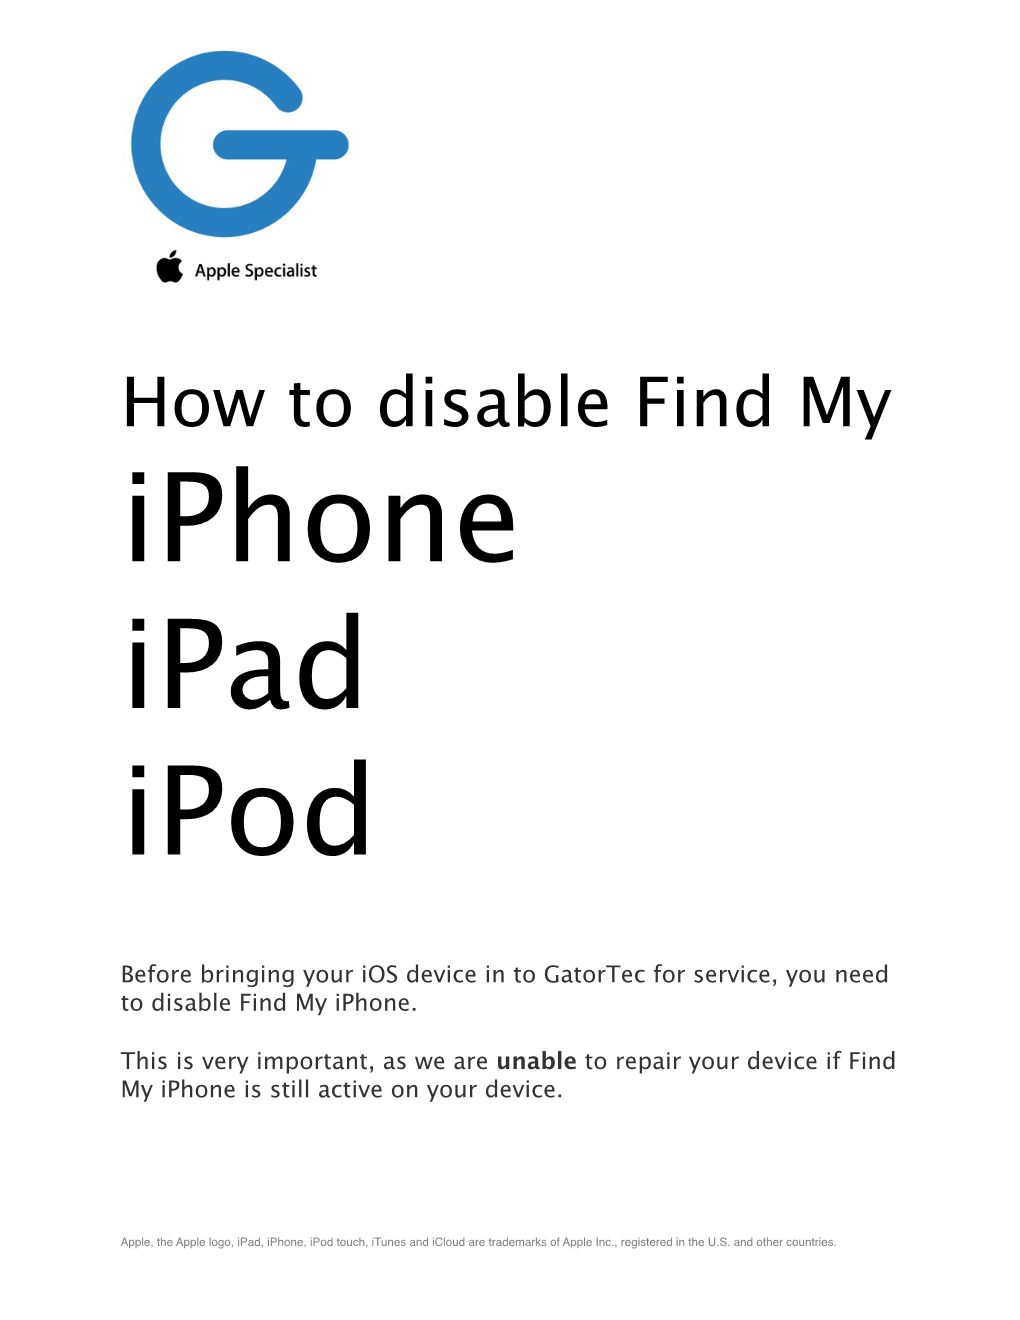 How to Disable Find My Iphone Ipad Ipod ! Before Bringing Your Ios Device in to Gatortec for Service, You Need to Disable Find My Iphone